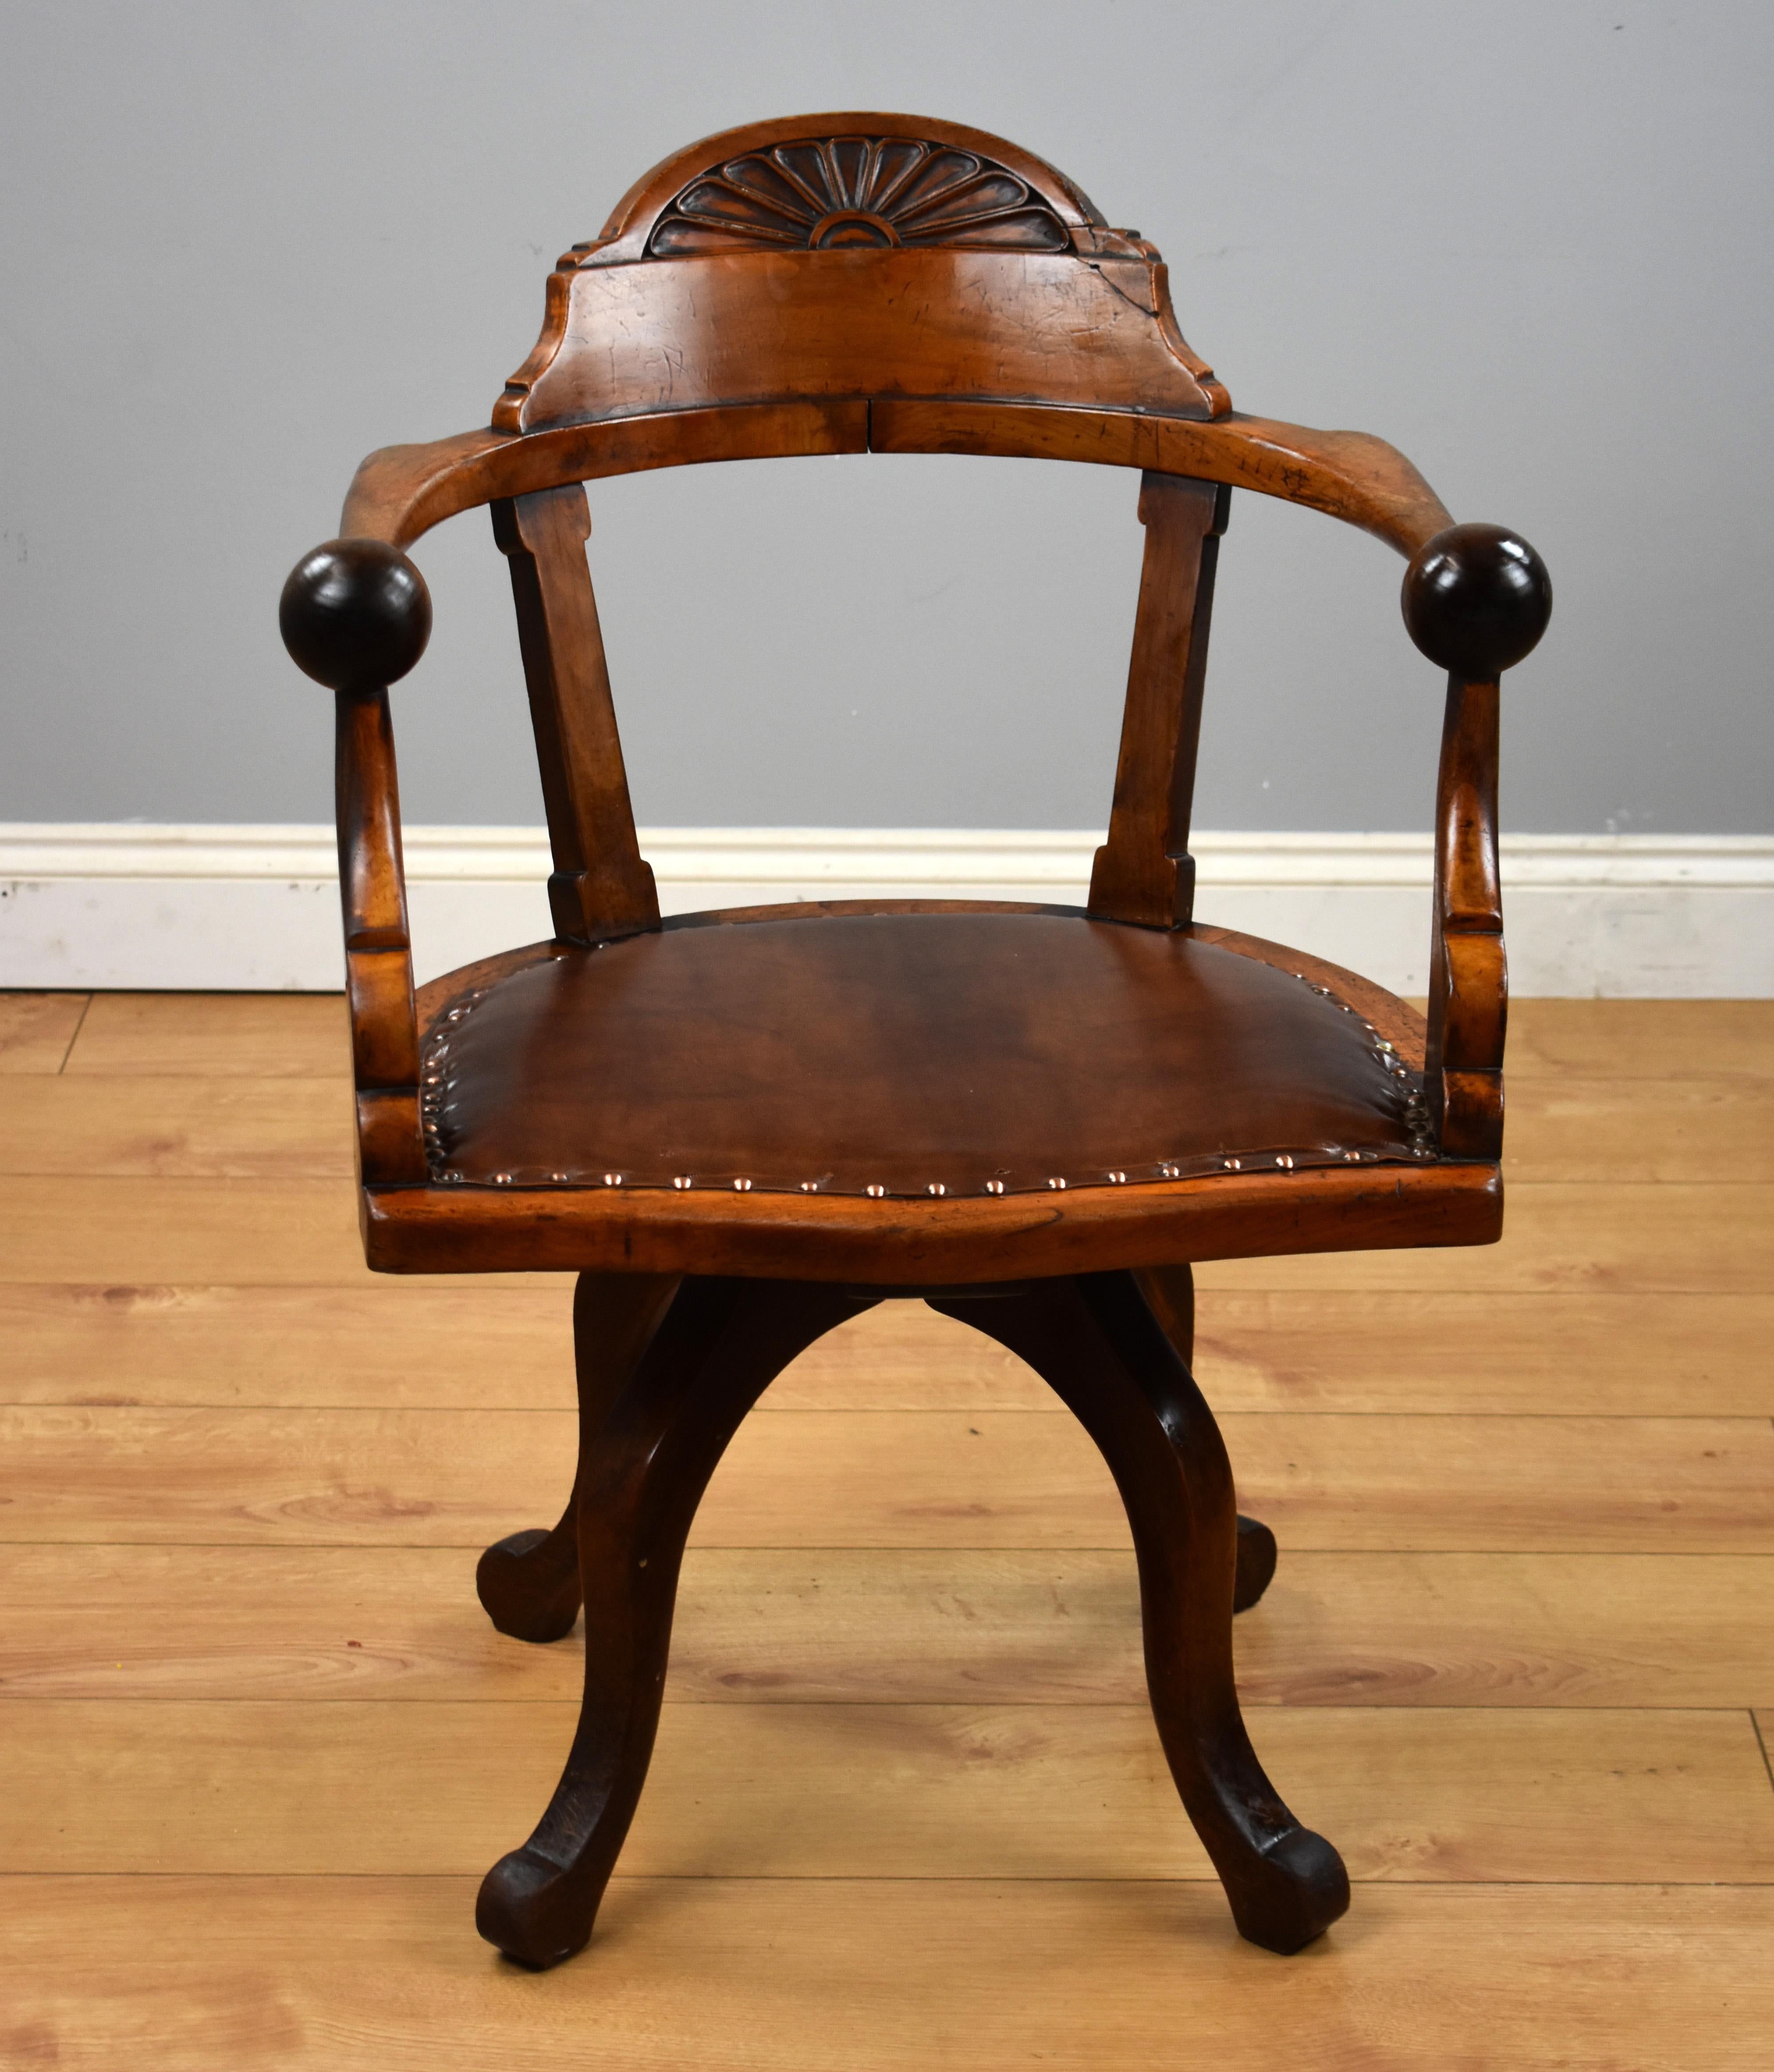 For sale is a Victorian mahogany desk chair, in the Arts & Crafts style, revolving and with four down swept legs terminating on scroll feet.

Measures: Width 24